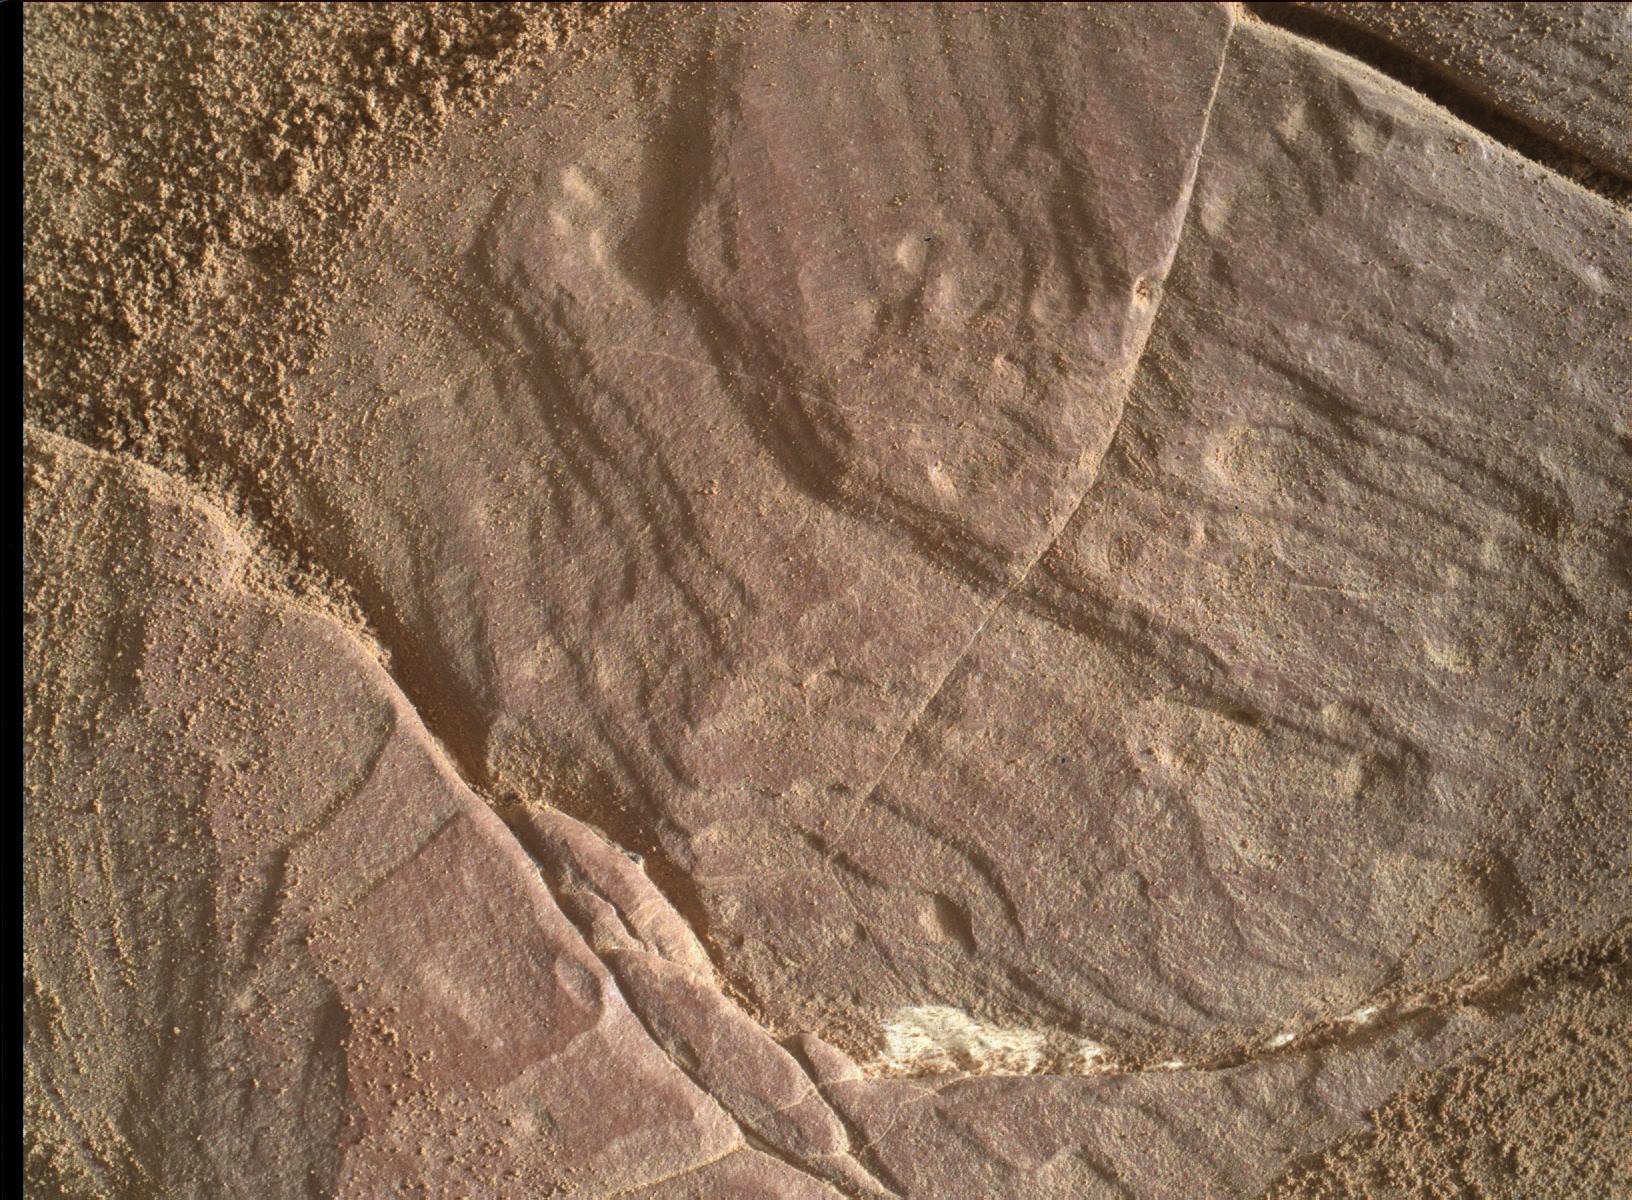 Nasa's Mars rover Curiosity acquired this image using its Mars Hand Lens Imager (MAHLI) on Sol 1818